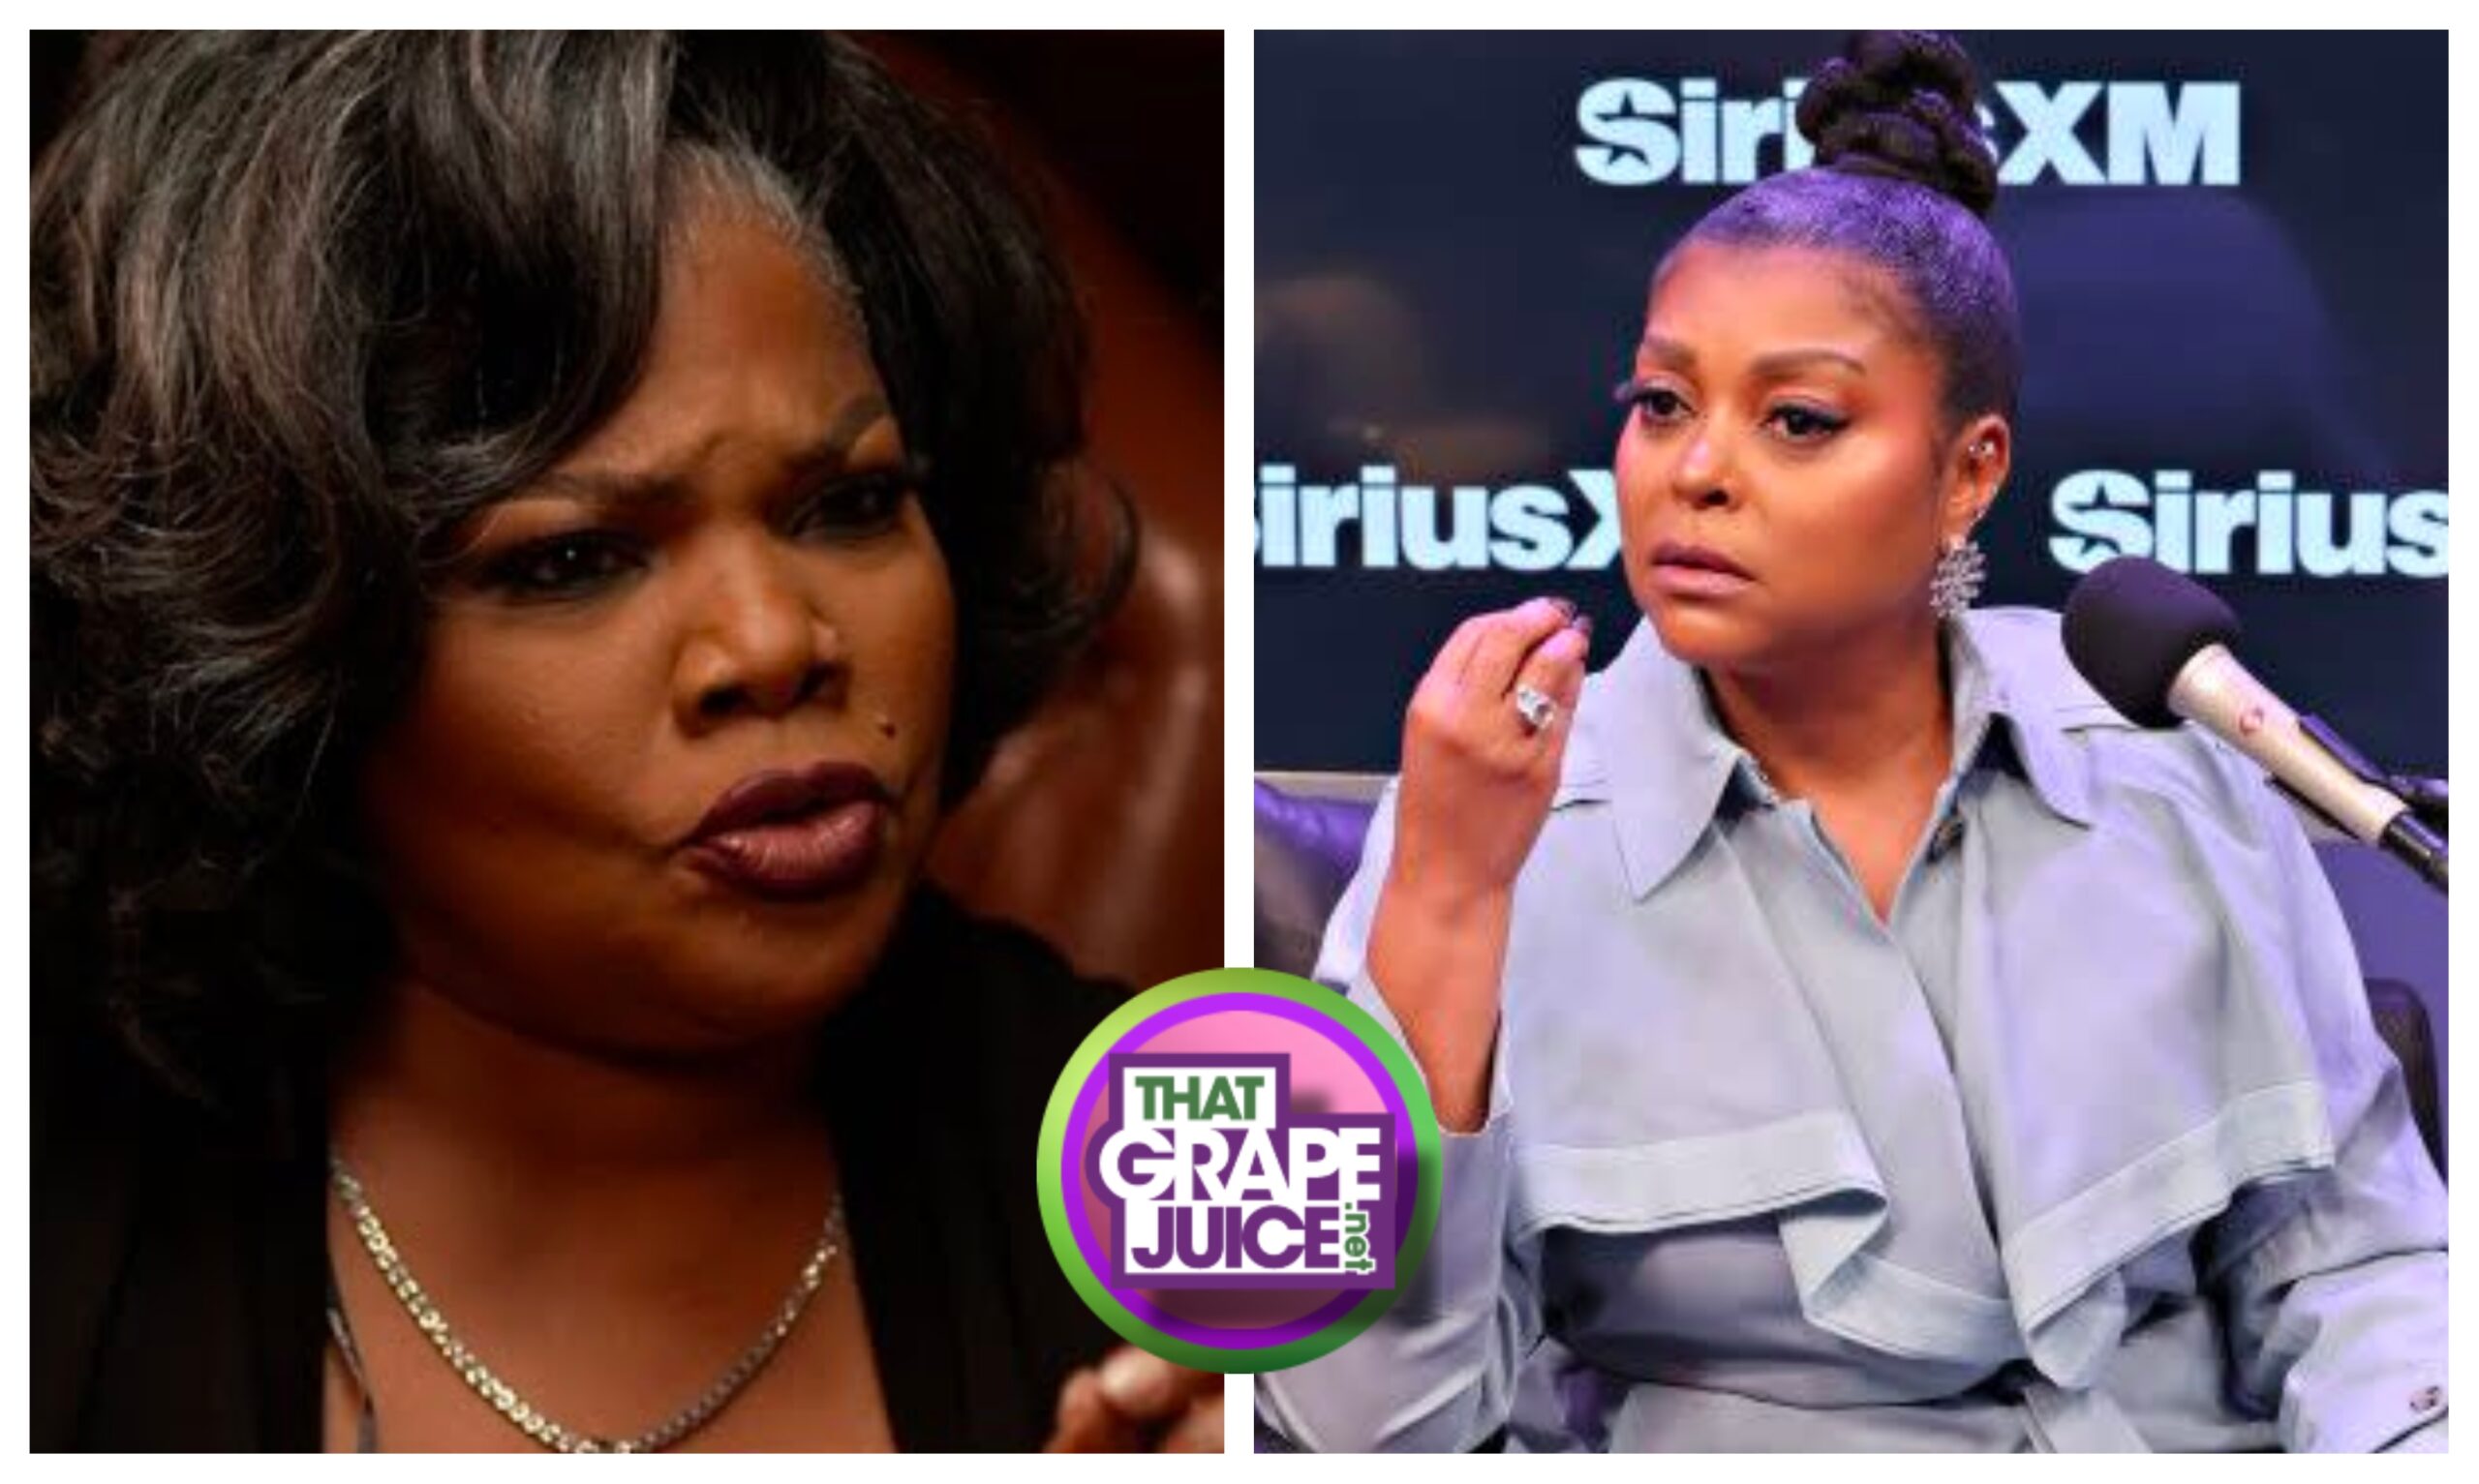 Mo’Nique Says Being Painted as a “Big, Fat, Black Woman” Was the Difference in the Response to Taraji P. Henson’s Pay Drama